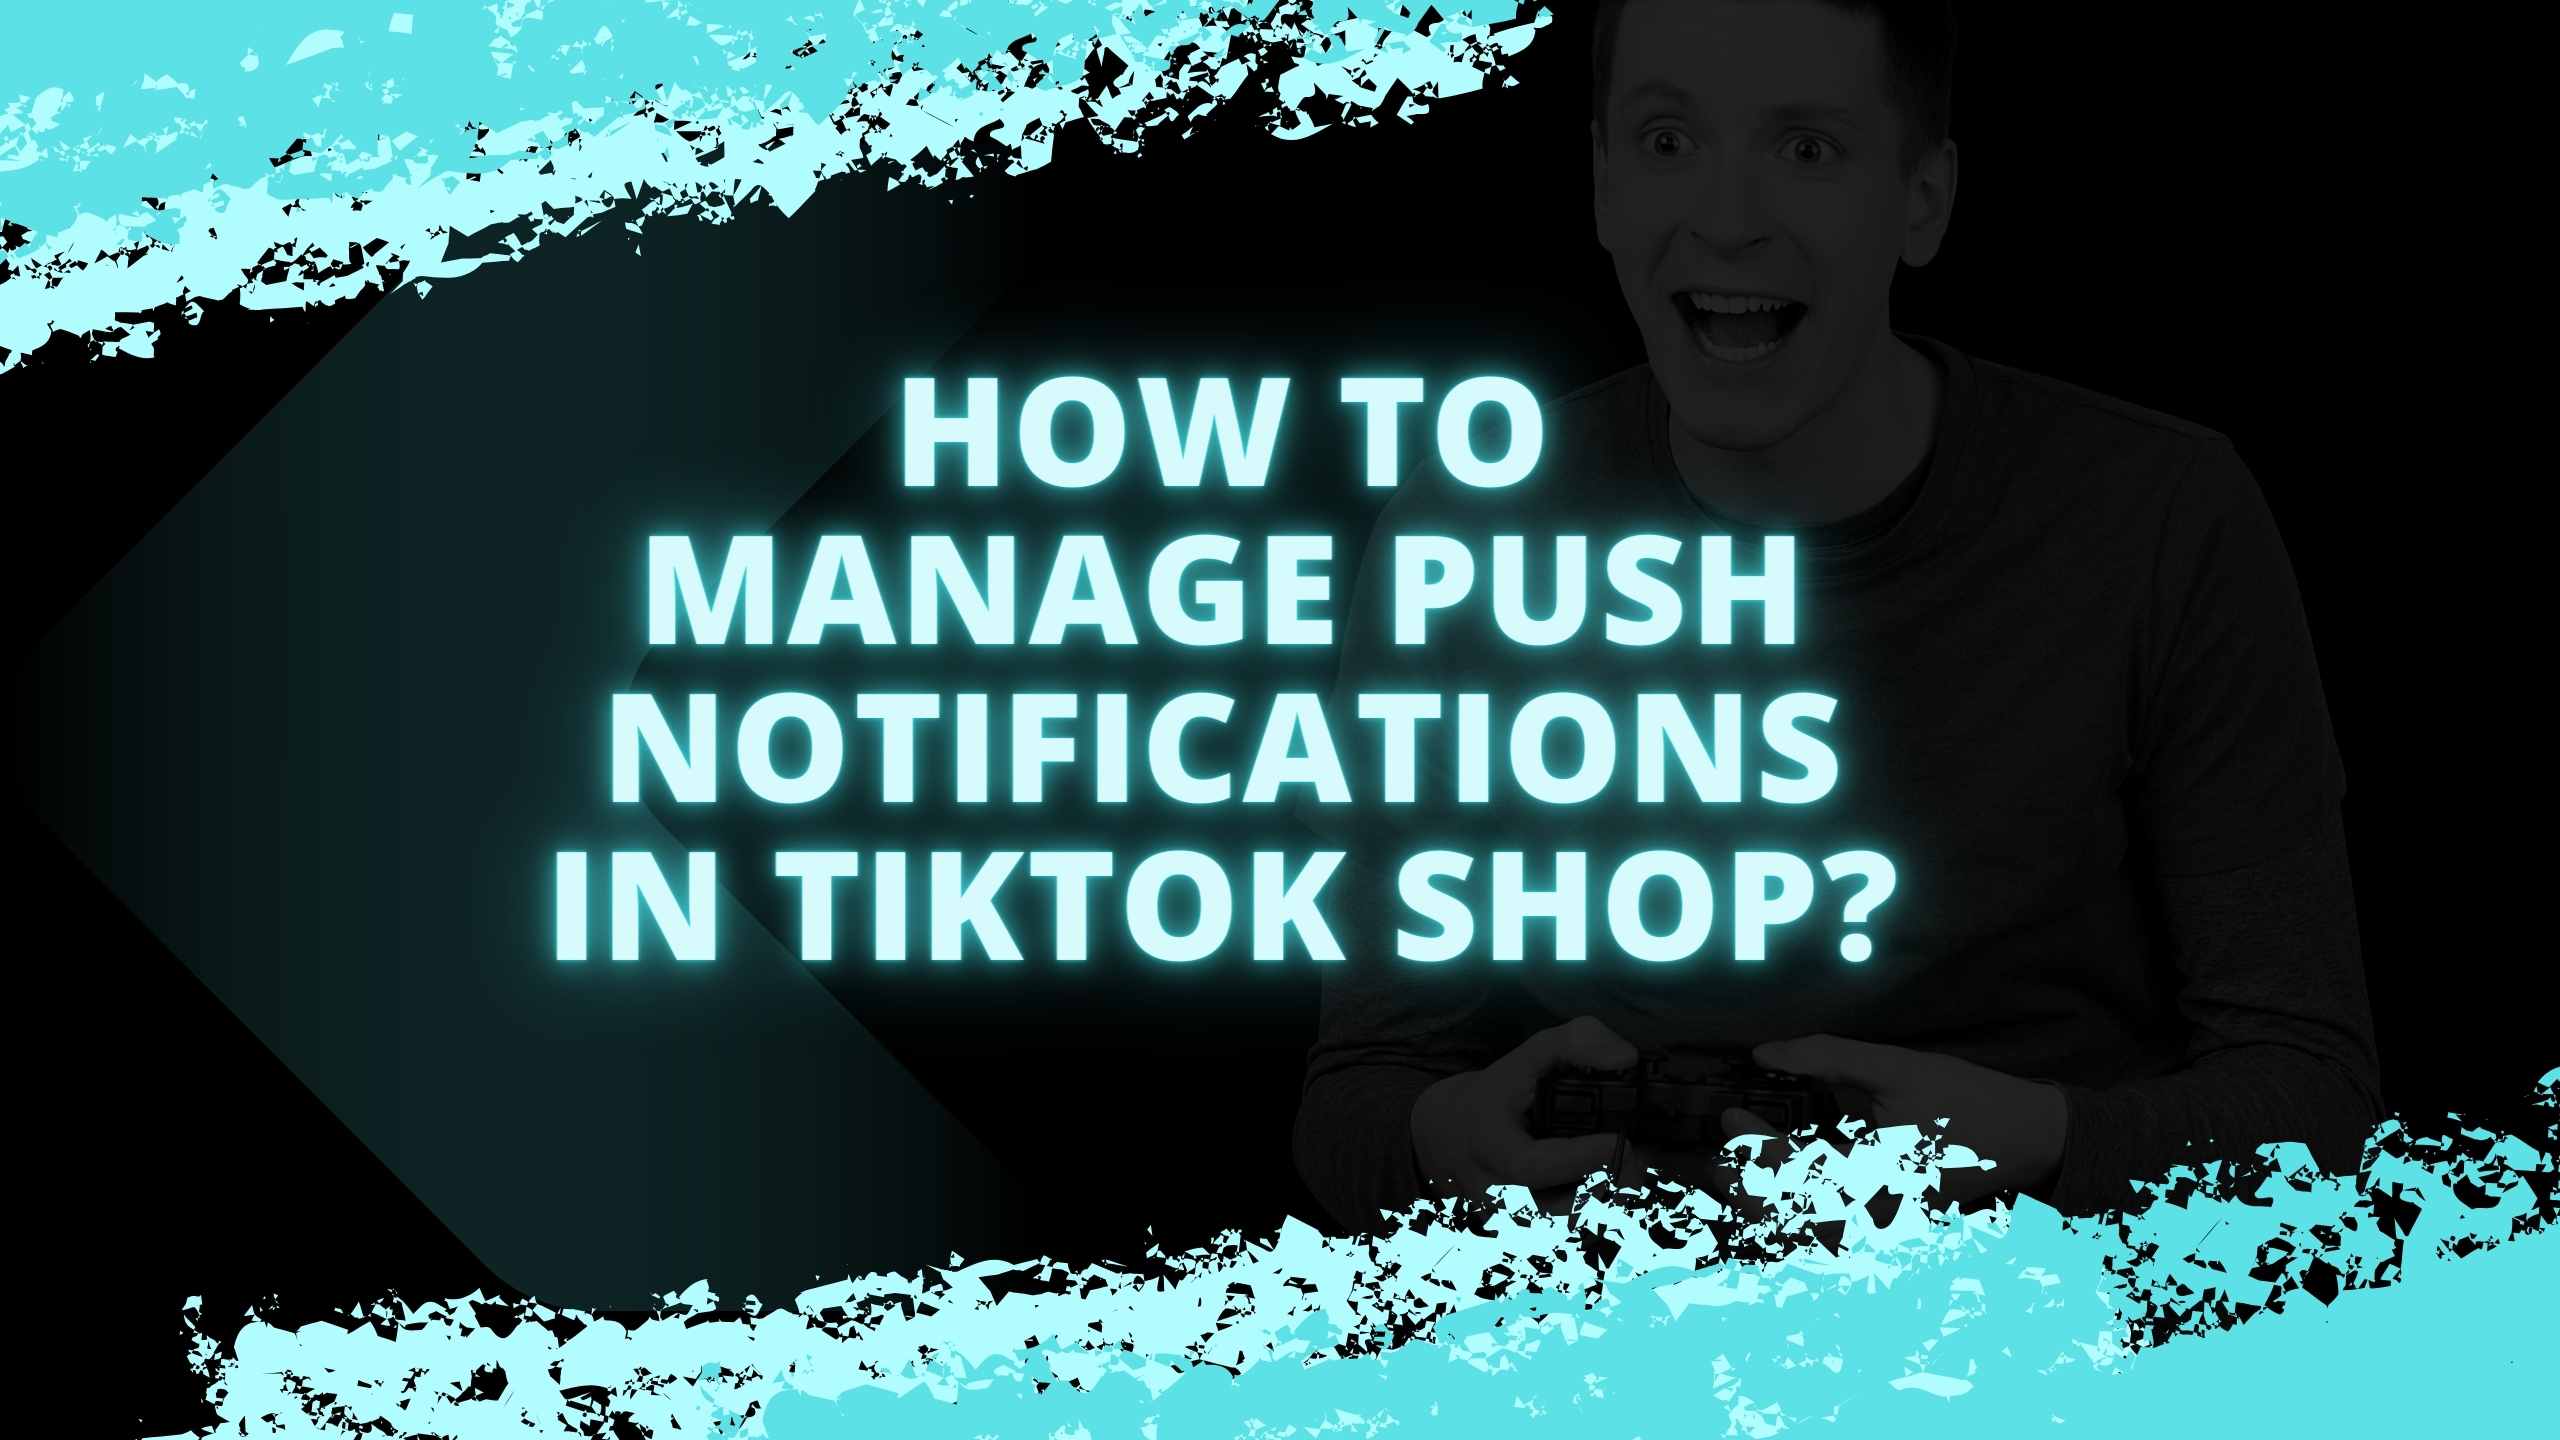 How to Manage Push Notifications in TikTok Shop?